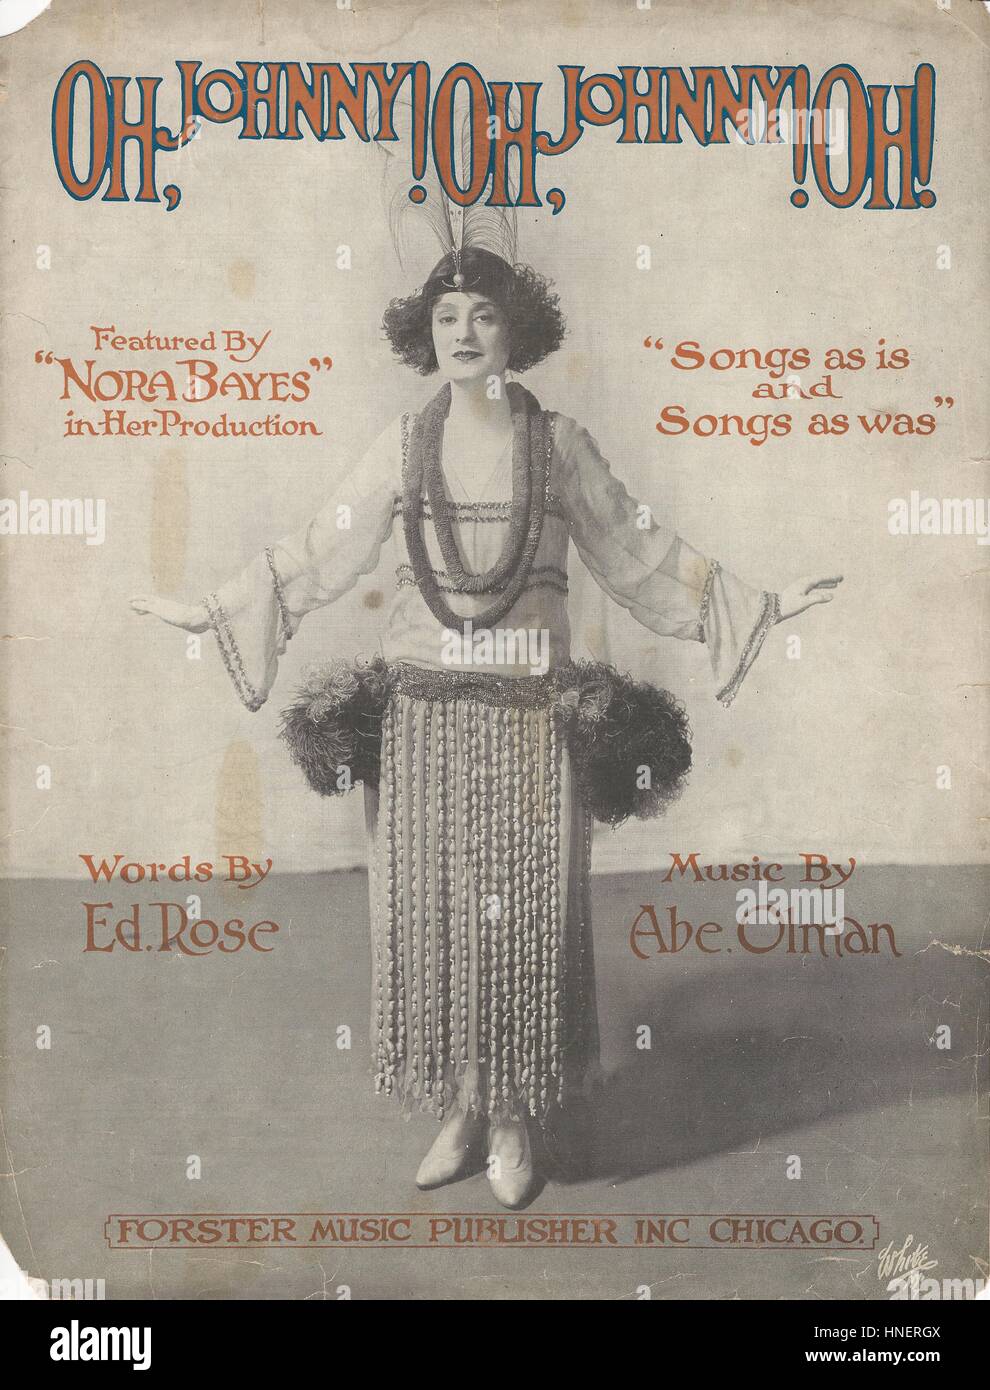 'Oh, Johnny! Oh, Johnny!, Oh!' from the Vaudeville Musical 'Songs As Is and Songs As Was' Sheet Music Cover Stock Photo